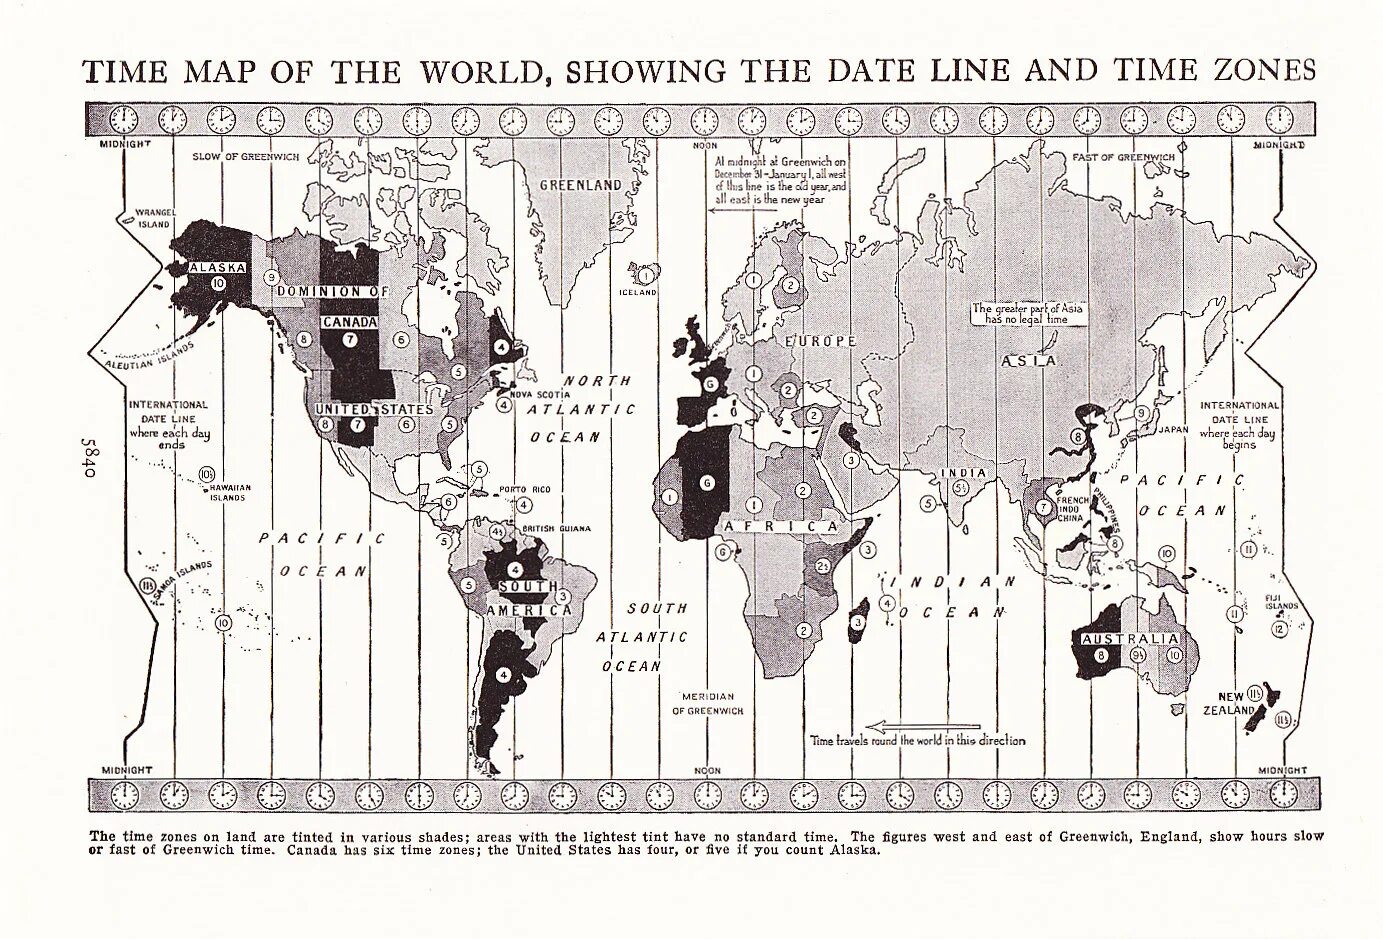 World time com. World time Zones Map. Standard time Zones of the World картинка.